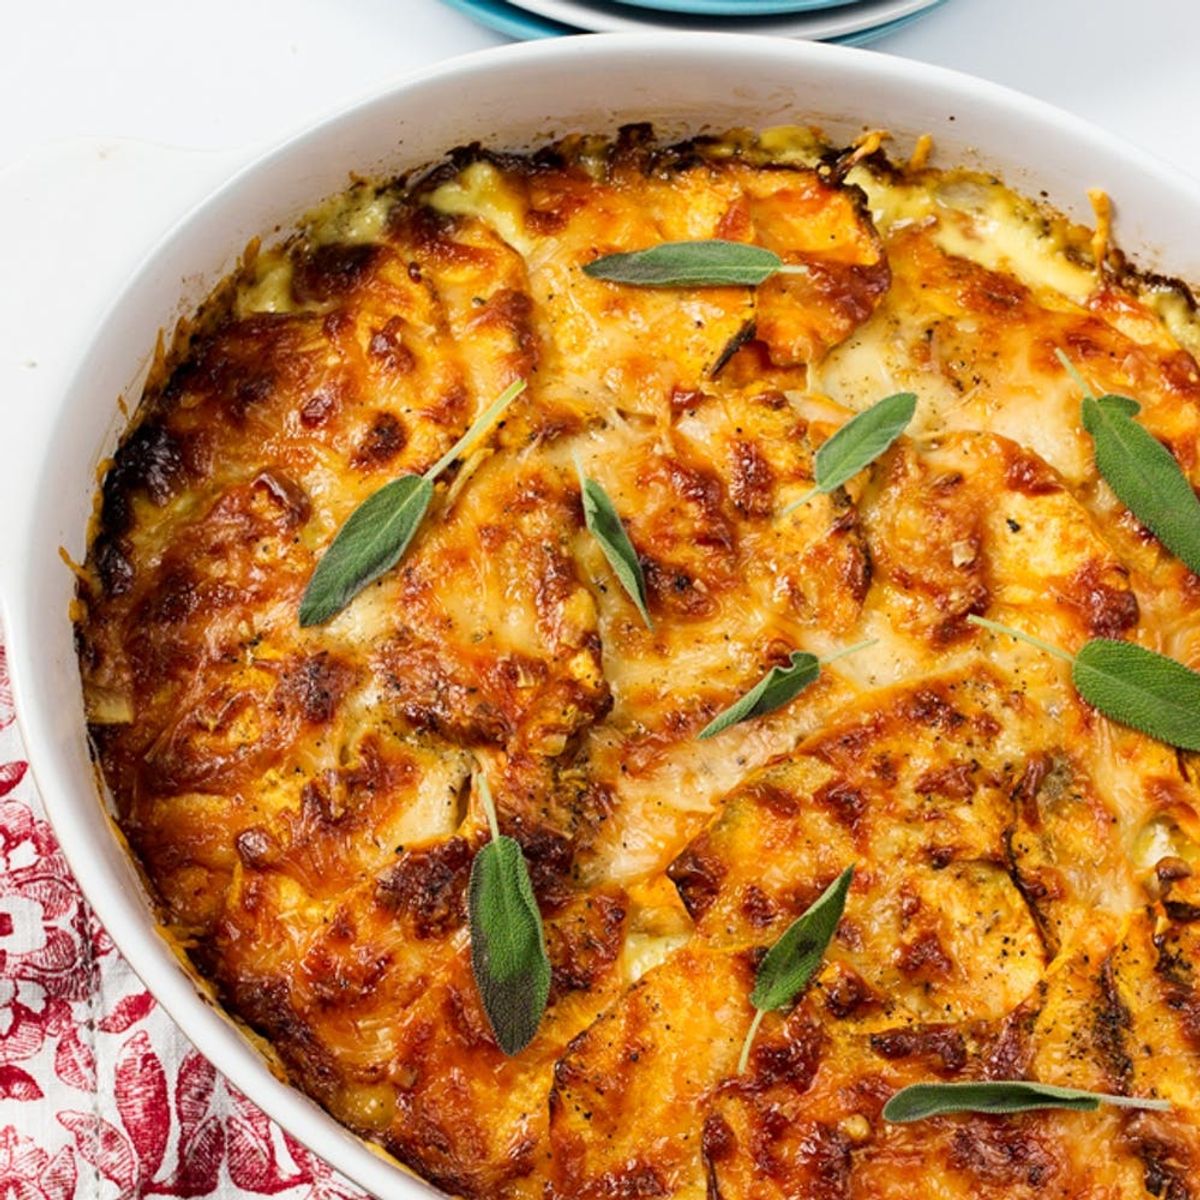 Beware: This Creamy, Cheesy Thanksgiving Gratin Recipe May Be Better Than The Main Course